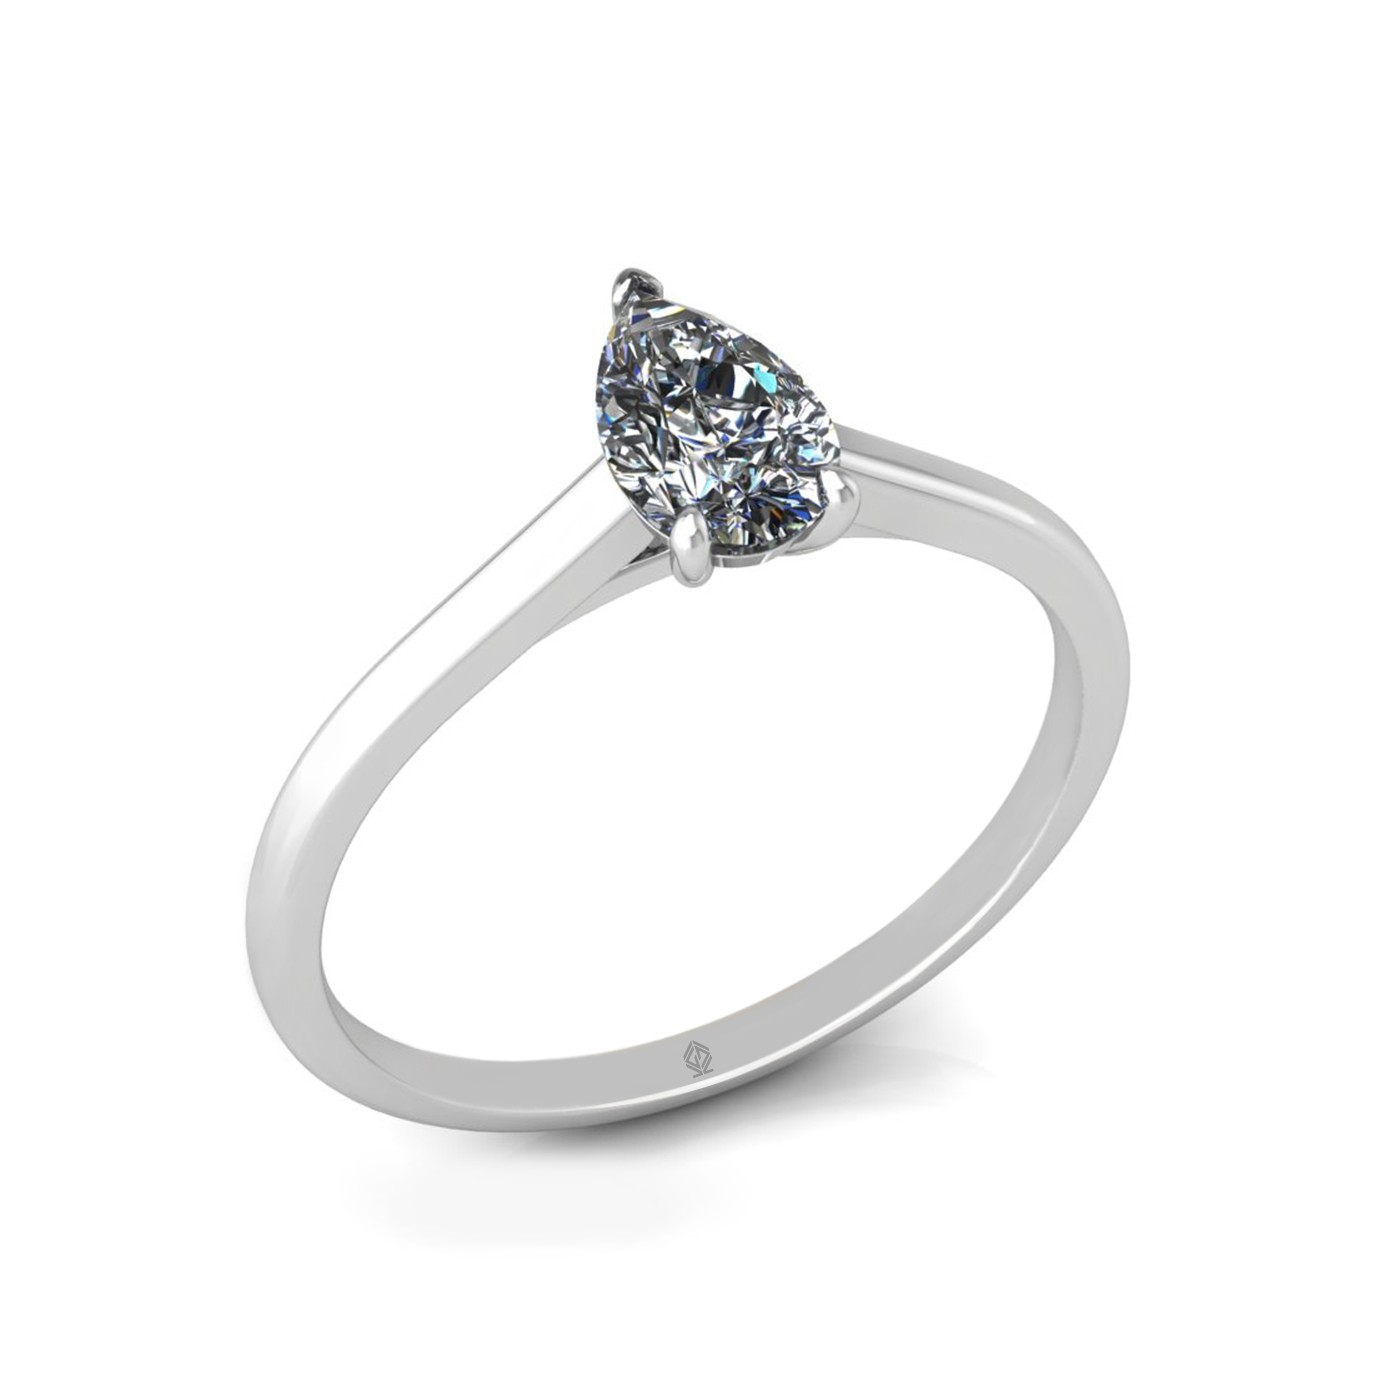 18k white gold  0,50 ct 3 prongs solitaire pear cut diamond engagement ring with whisper thin band